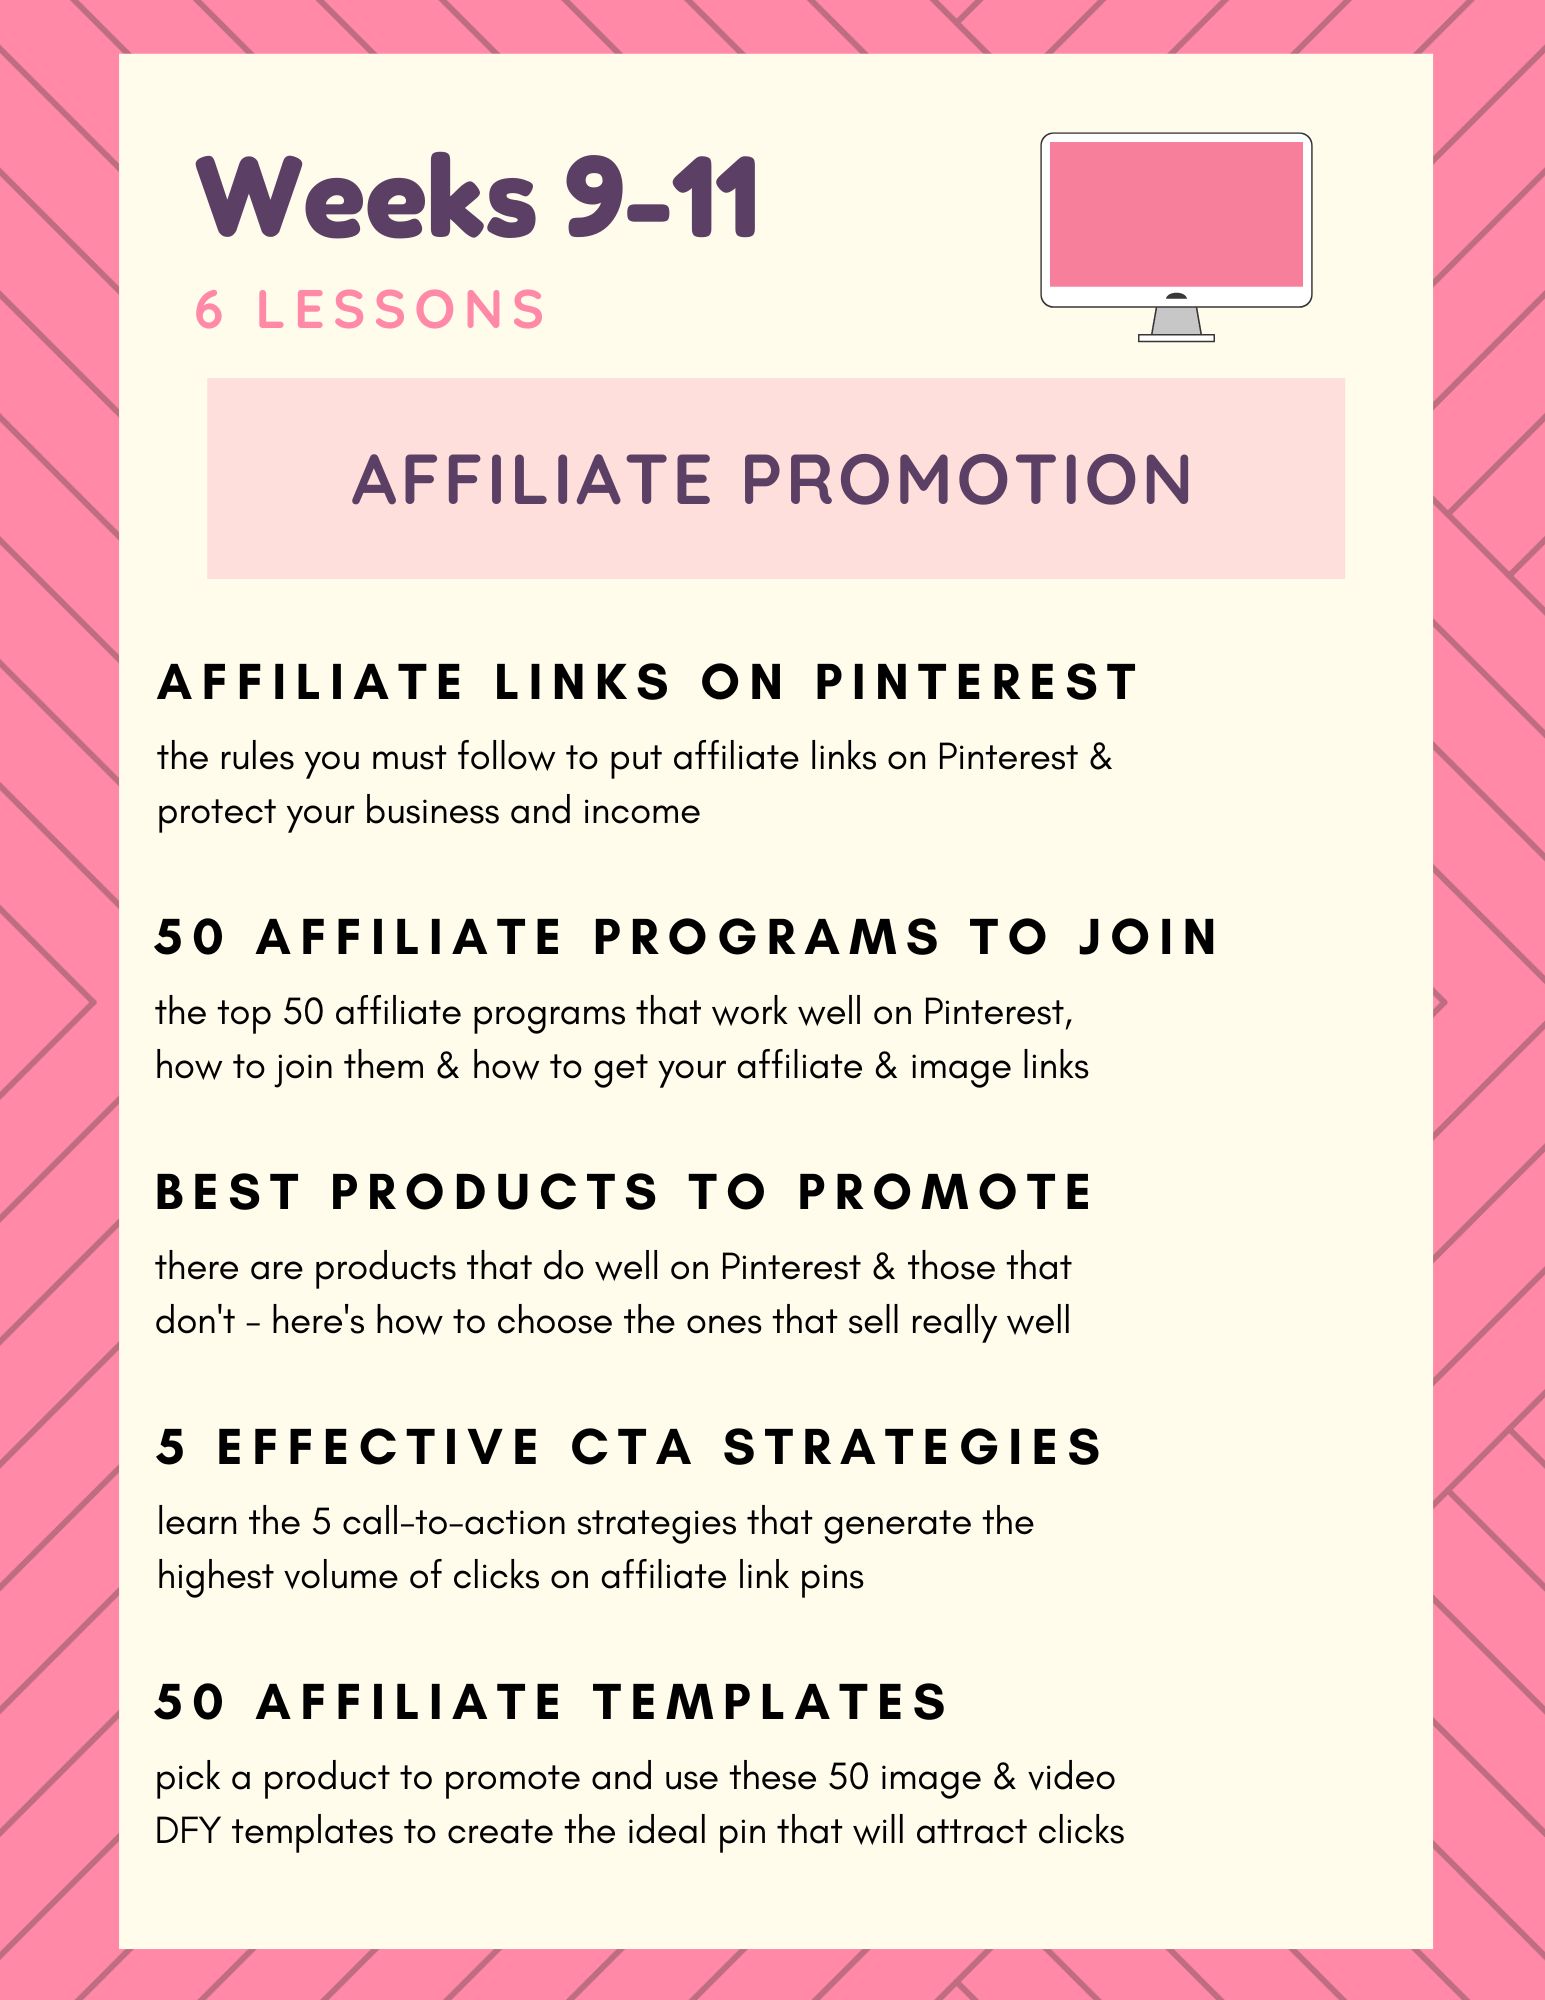 overview of weeks 9 to 11 course topics - affiliate promotion